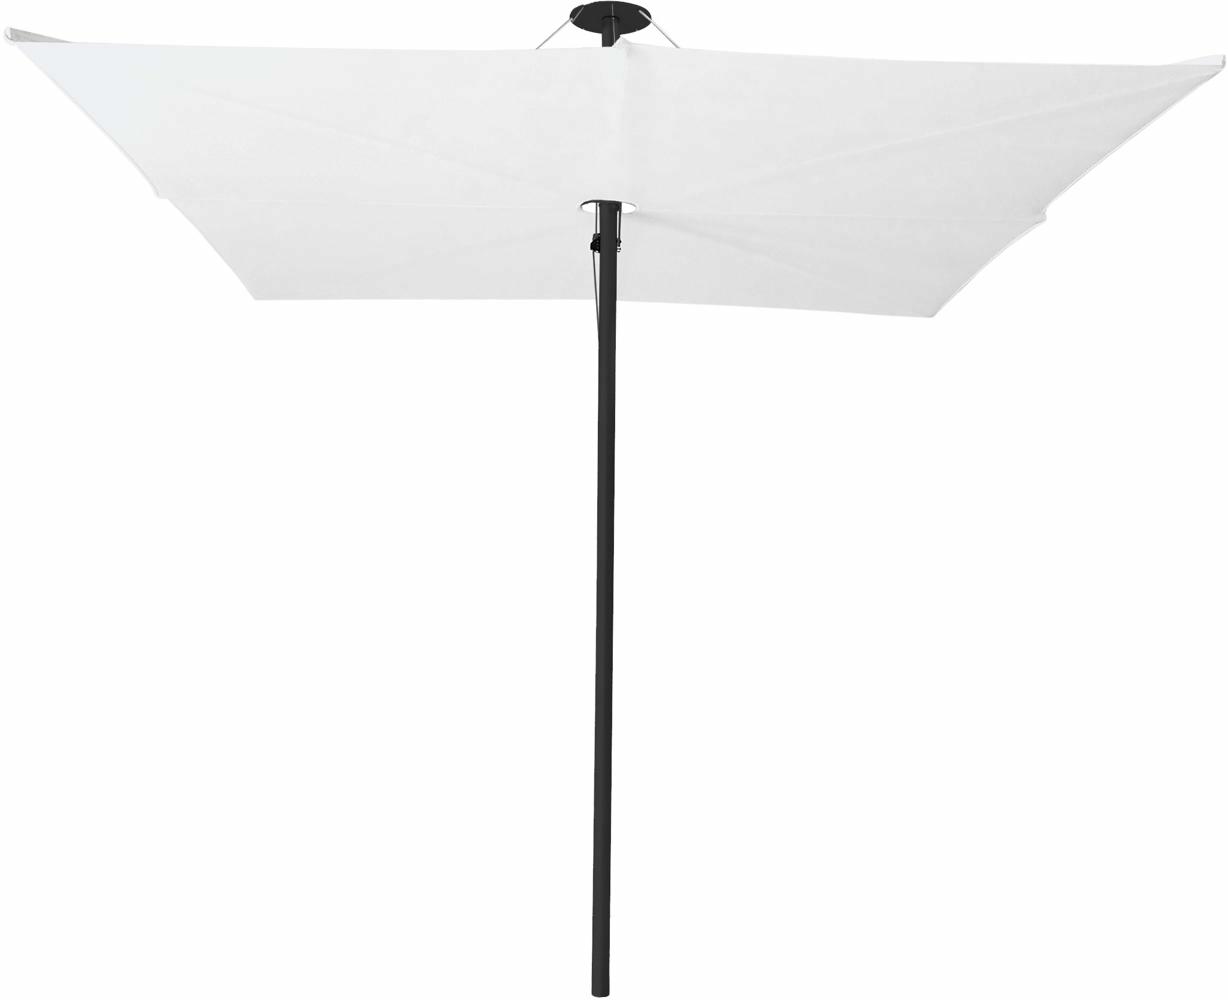 Infina center post umbrella, 3 m square, with frame in Black and Solidum Natural canopy.